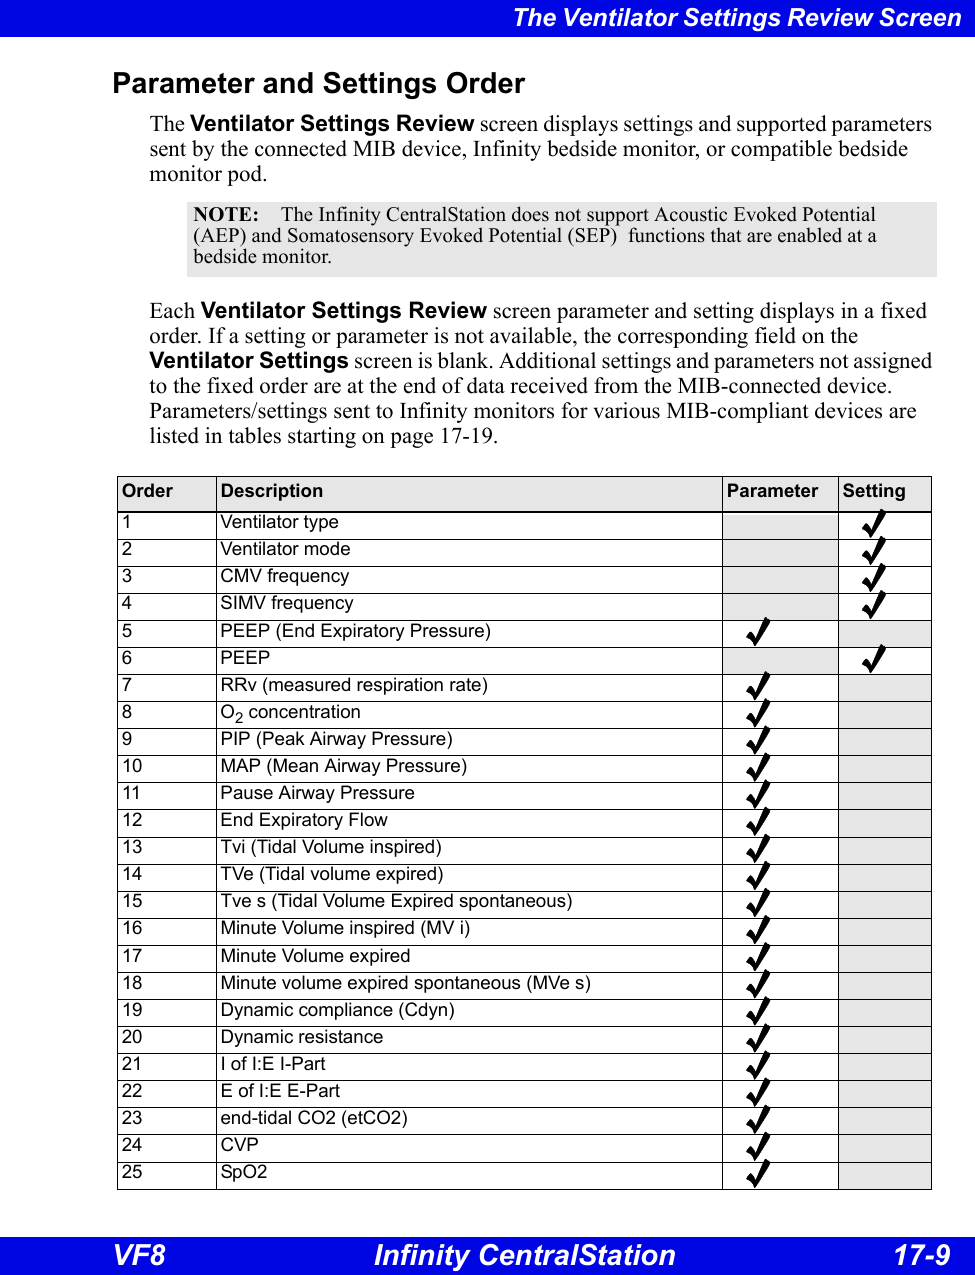 The Ventilator Settings Review Screen Infinity CentralStation 17-9 VF8Parameter and Settings OrderThe Ventilator Settings Review screen displays settings and supported parameters sent by the connected MIB device, Infinity bedside monitor, or compatible bedside monitor pod.Each Ventilator Settings Review screen parameter and setting displays in a fixed order. If a setting or parameter is not available, the corresponding field on the Ventilator Settings screen is blank. Additional settings and parameters not assigned to the fixed order are at the end of data received from the MIB-connected device. Parameters/settings sent to Infinity monitors for various MIB-compliant devices are listed in tables starting on page 17-19. NOTE: The Infinity CentralStation does not support Acoustic Evoked Potential (AEP) and Somatosensory Evoked Potential (SEP)  functions that are enabled at a bedside monitor.   Order Description Parameter Setting1 Ventilator type2 Ventilator mode3 CMV frequency4 SIMV frequency5 PEEP (End Expiratory Pressure)6 PEEP7 RRv (measured respiration rate)8O2 concentration9 PIP (Peak Airway Pressure)10 MAP (Mean Airway Pressure)11 Pause Airway Pressure12 End Expiratory Flow13 Tvi (Tidal Volume inspired) 14 TVe (Tidal volume expired)15 Tve s (Tidal Volume Expired spontaneous)16 Minute Volume inspired (MV i)17 Minute Volume expired 18 Minute volume expired spontaneous (MVe s)19 Dynamic compliance (Cdyn)20 Dynamic resistance21 I of I:E I-Part22 E of I:E E-Part23 end-tidal CO2 (etCO2)24 CVP25 SpO2